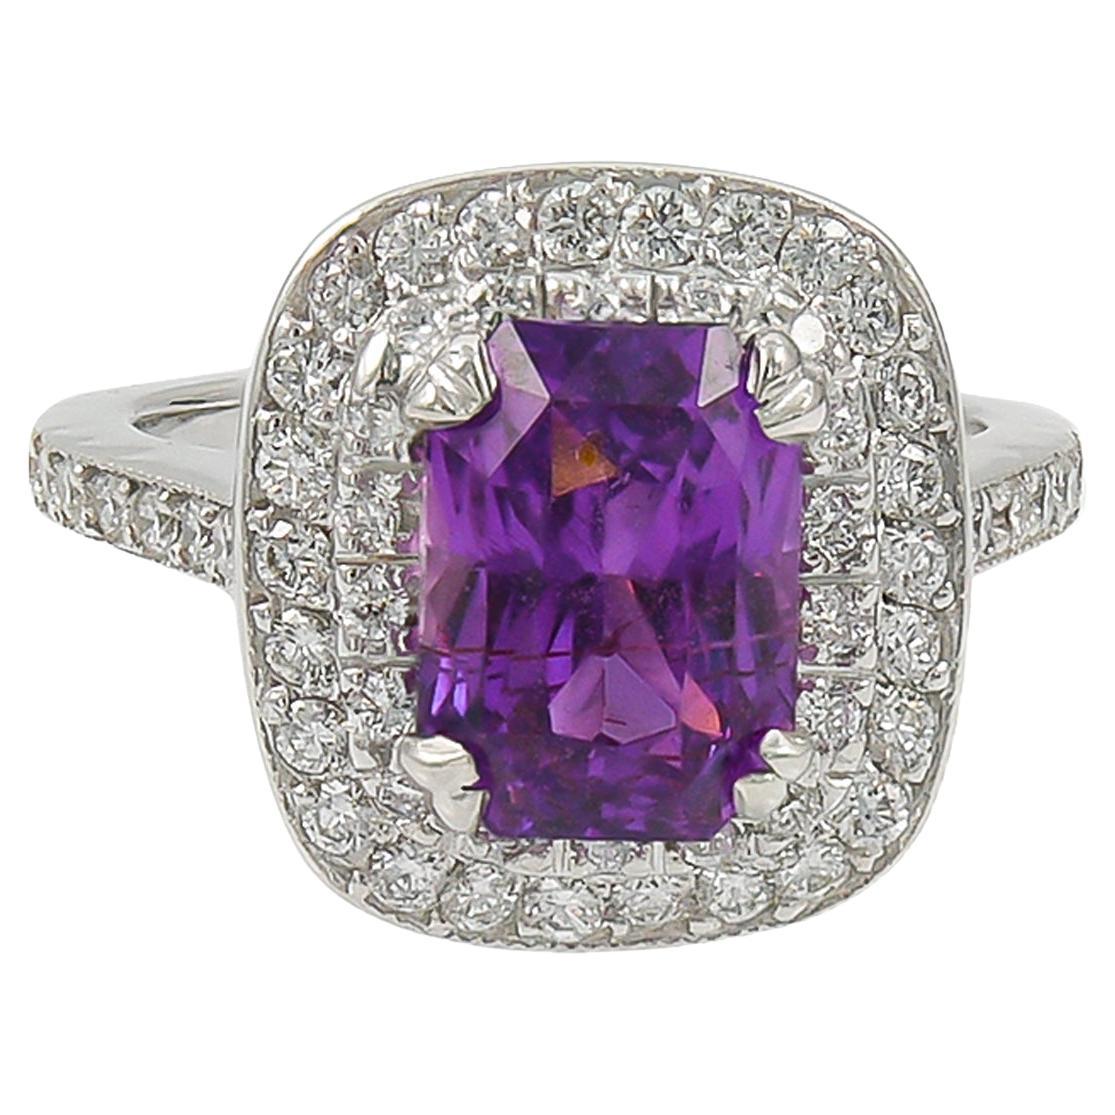 Spectra Fine Jewelry GIA Certified 3.21 Carat Purple Sapphire Cocktail Ring For Sale